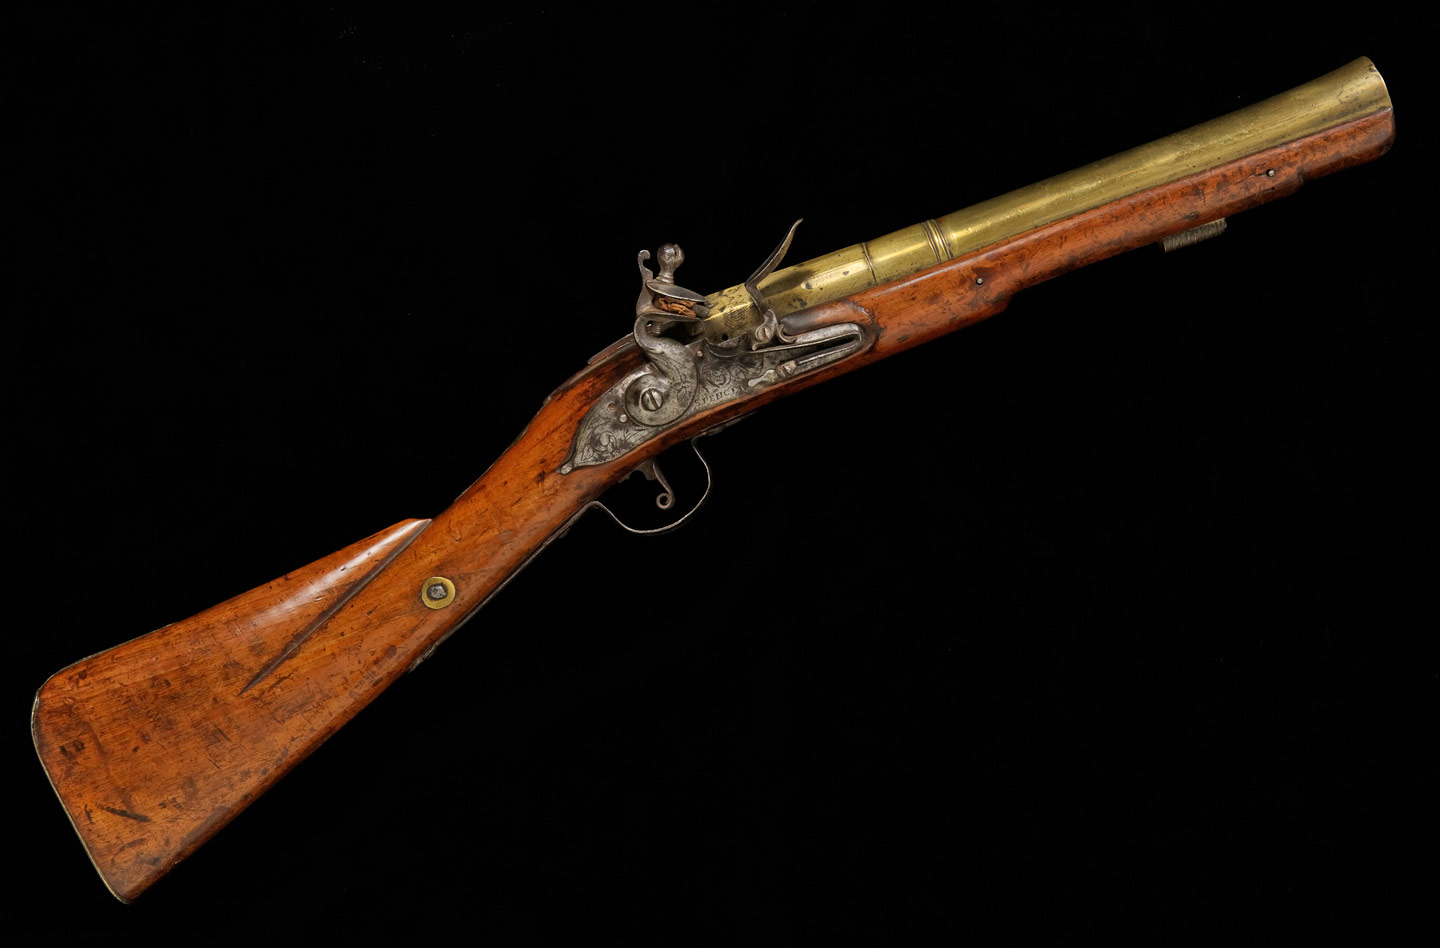 III. The Anatomy of the Blunderbuss: Understanding its Design and Components